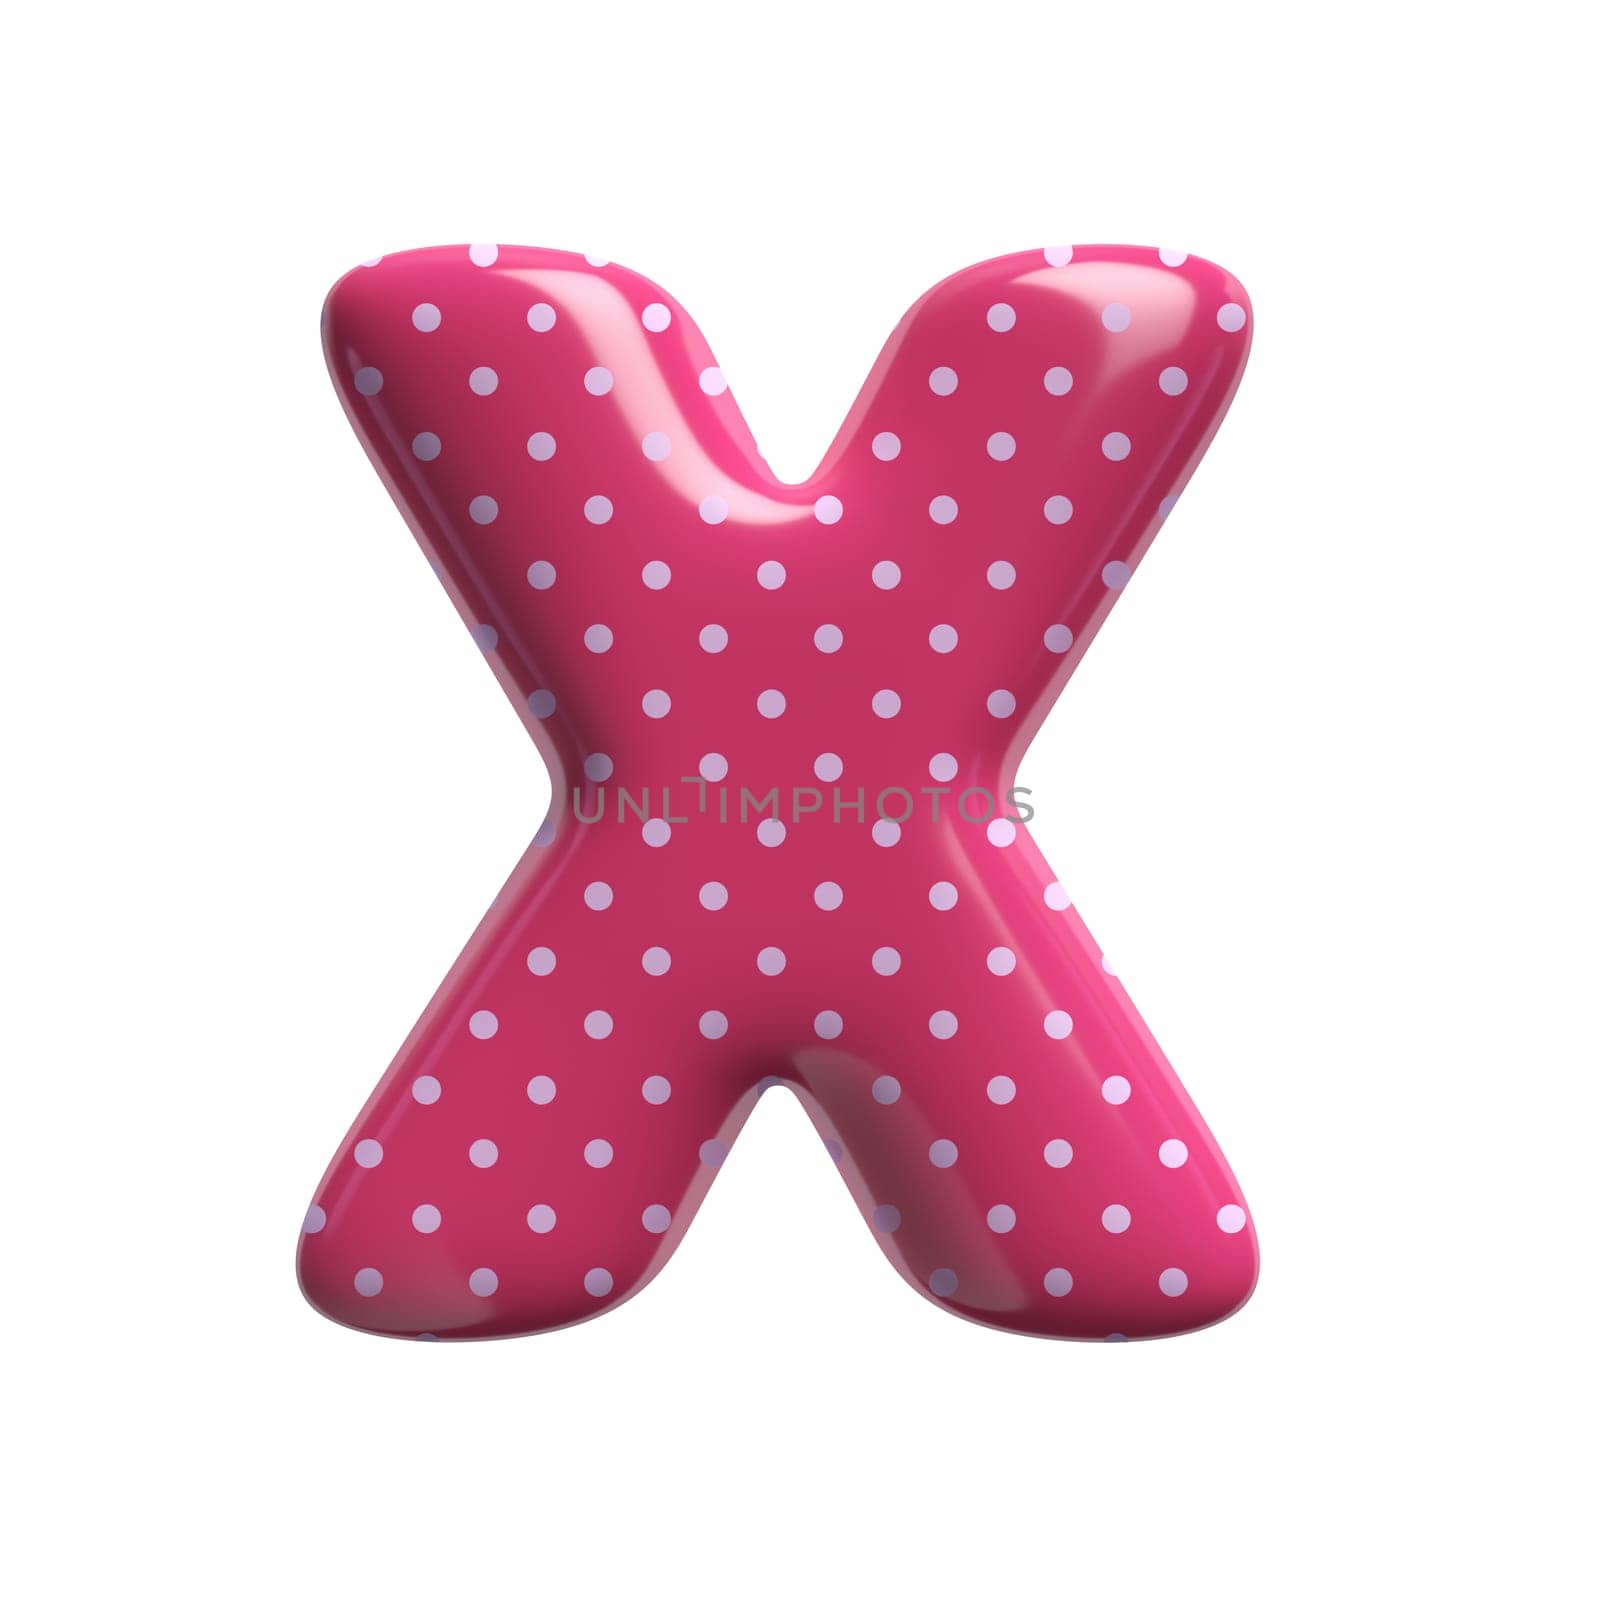 Polka dot letter X - Upper-case 3d pink retro font - suitable for Fashion, retro design or decoration related subjects by chrisroll